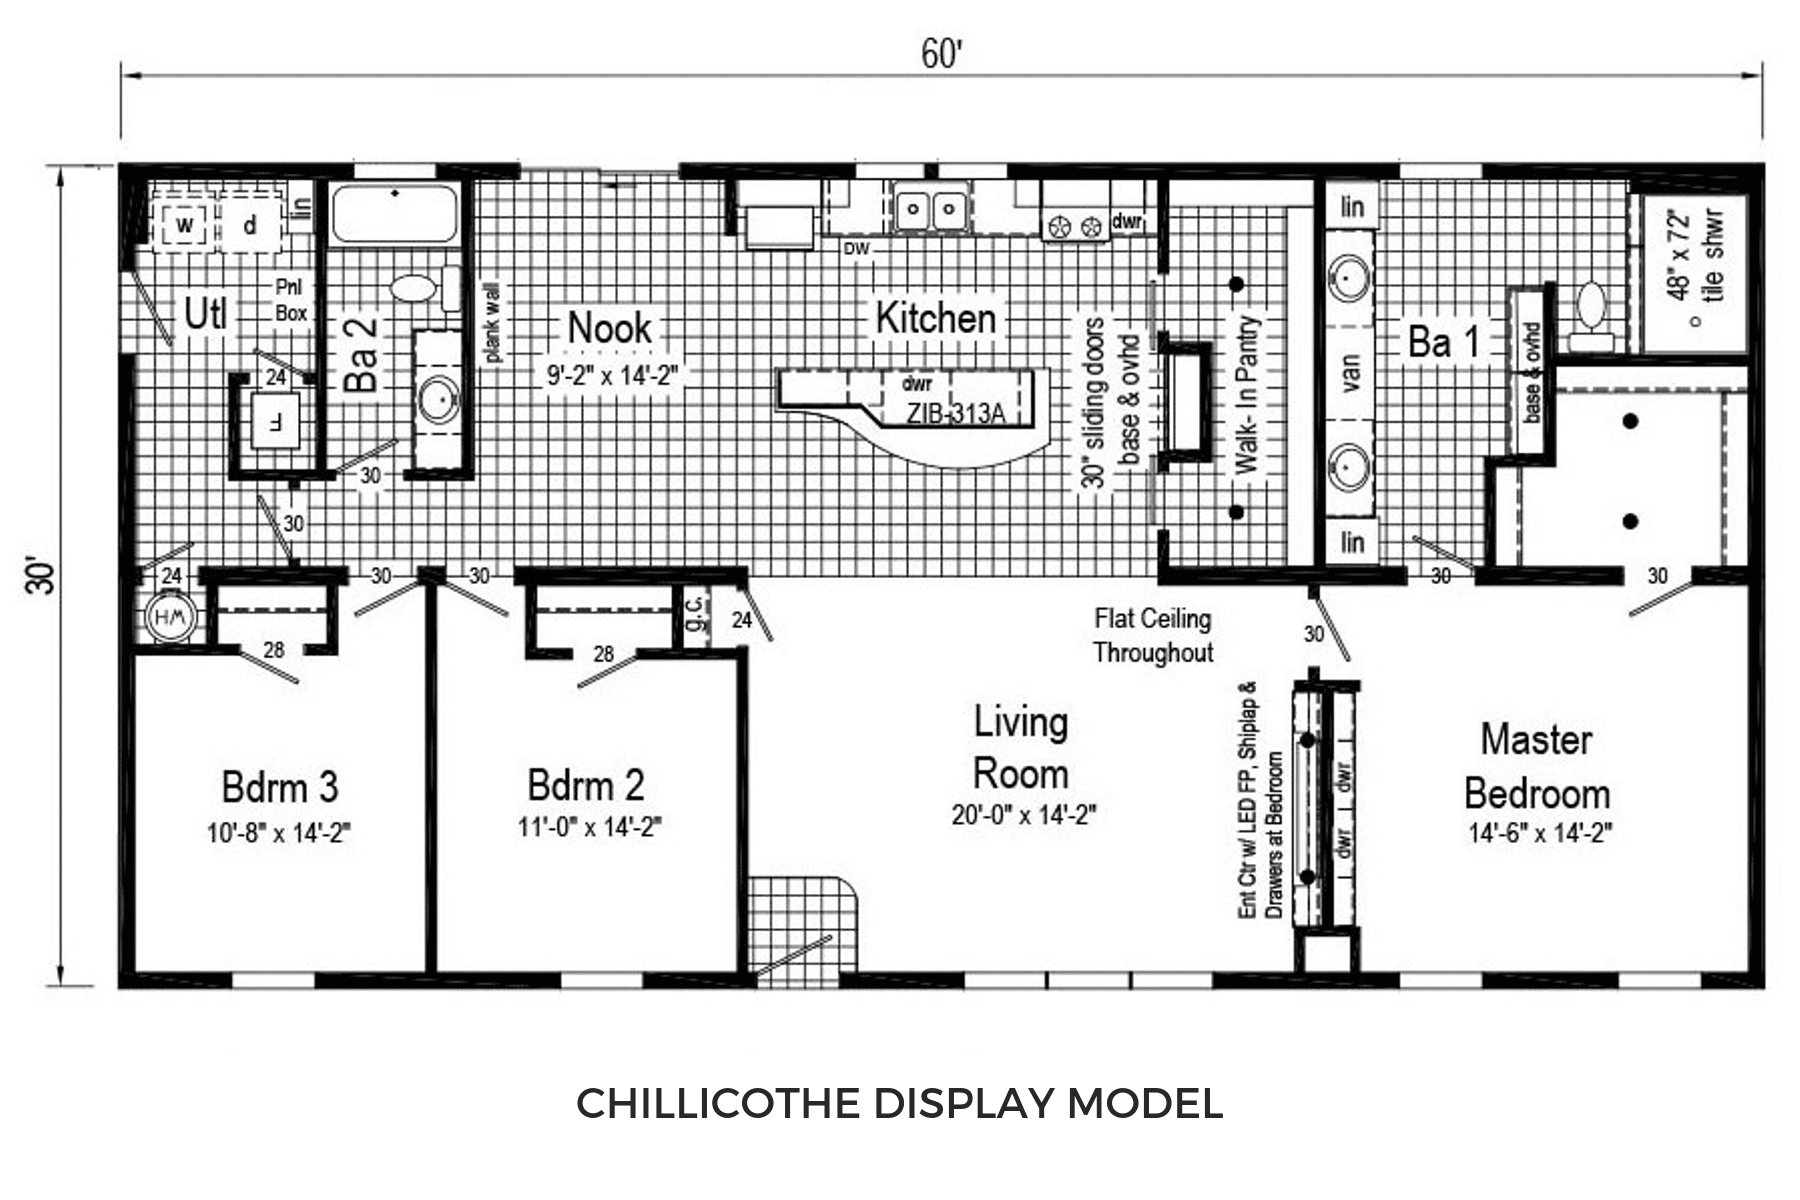 Commodore Limited 3 RX 780 Chillicothe Floor Plan 1 - D&W Homes